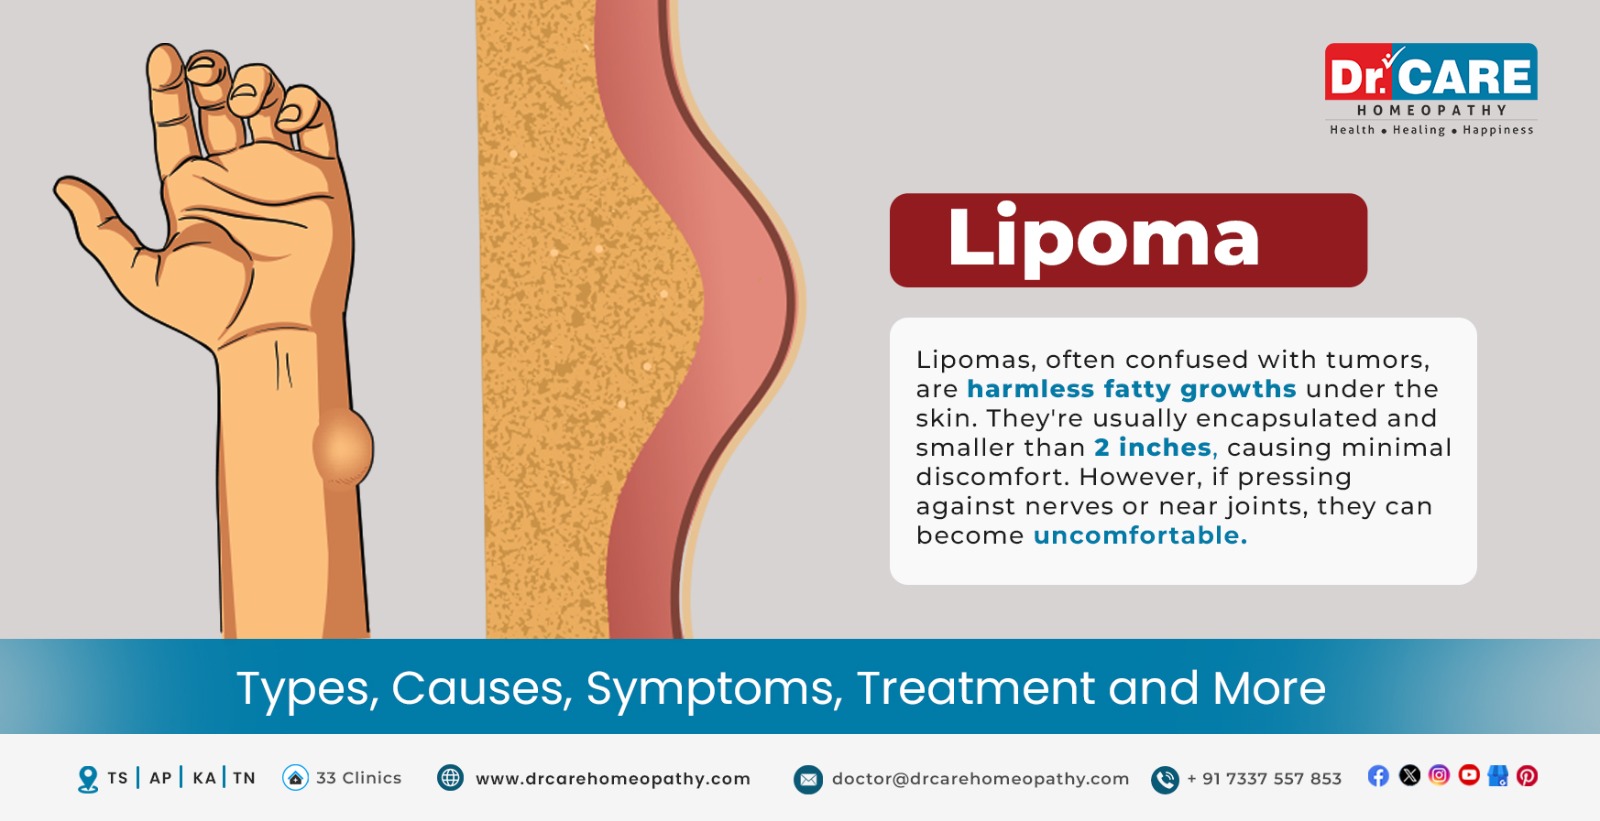 Lipoma: Types, Causes, Symptoms, Treatment, and More